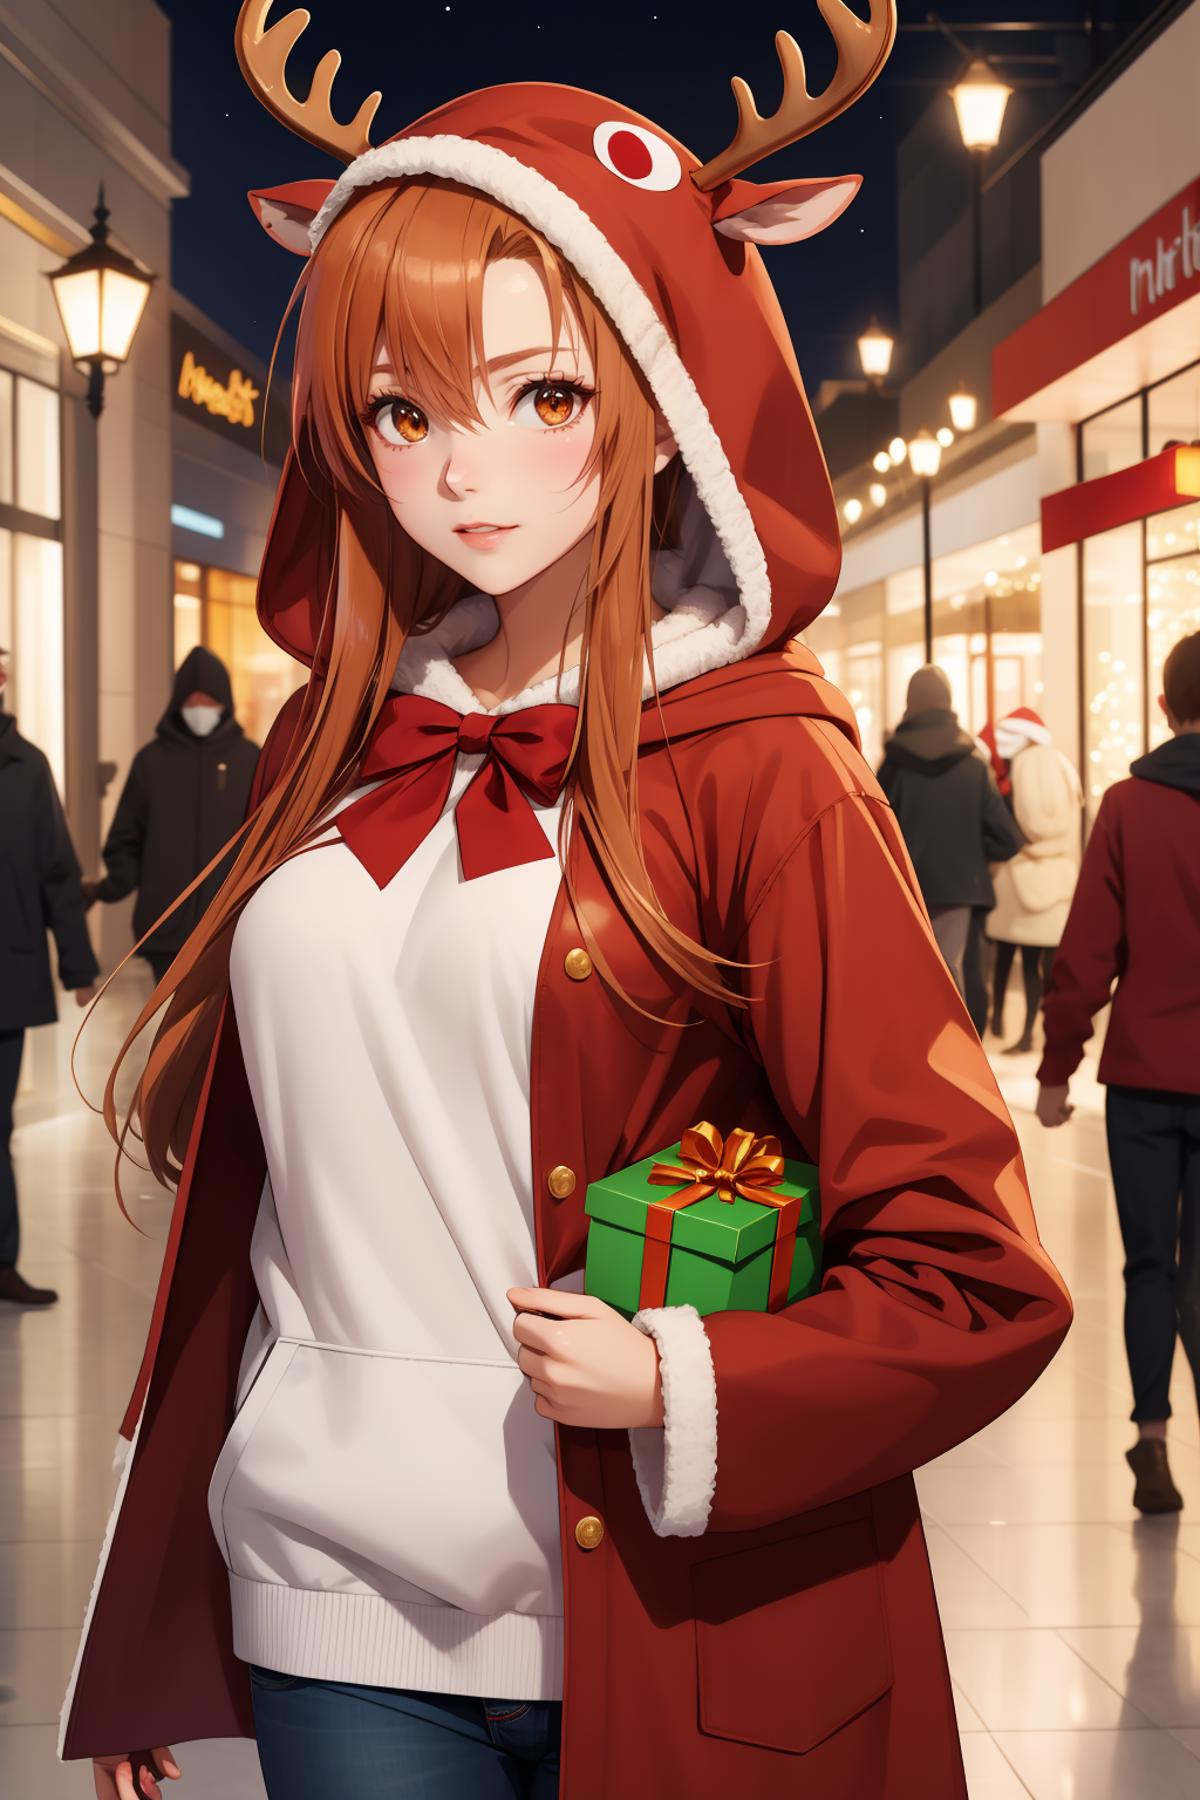 Reindeer Costume Outfit (Christmas/Holidays) LoRA image by GDogz